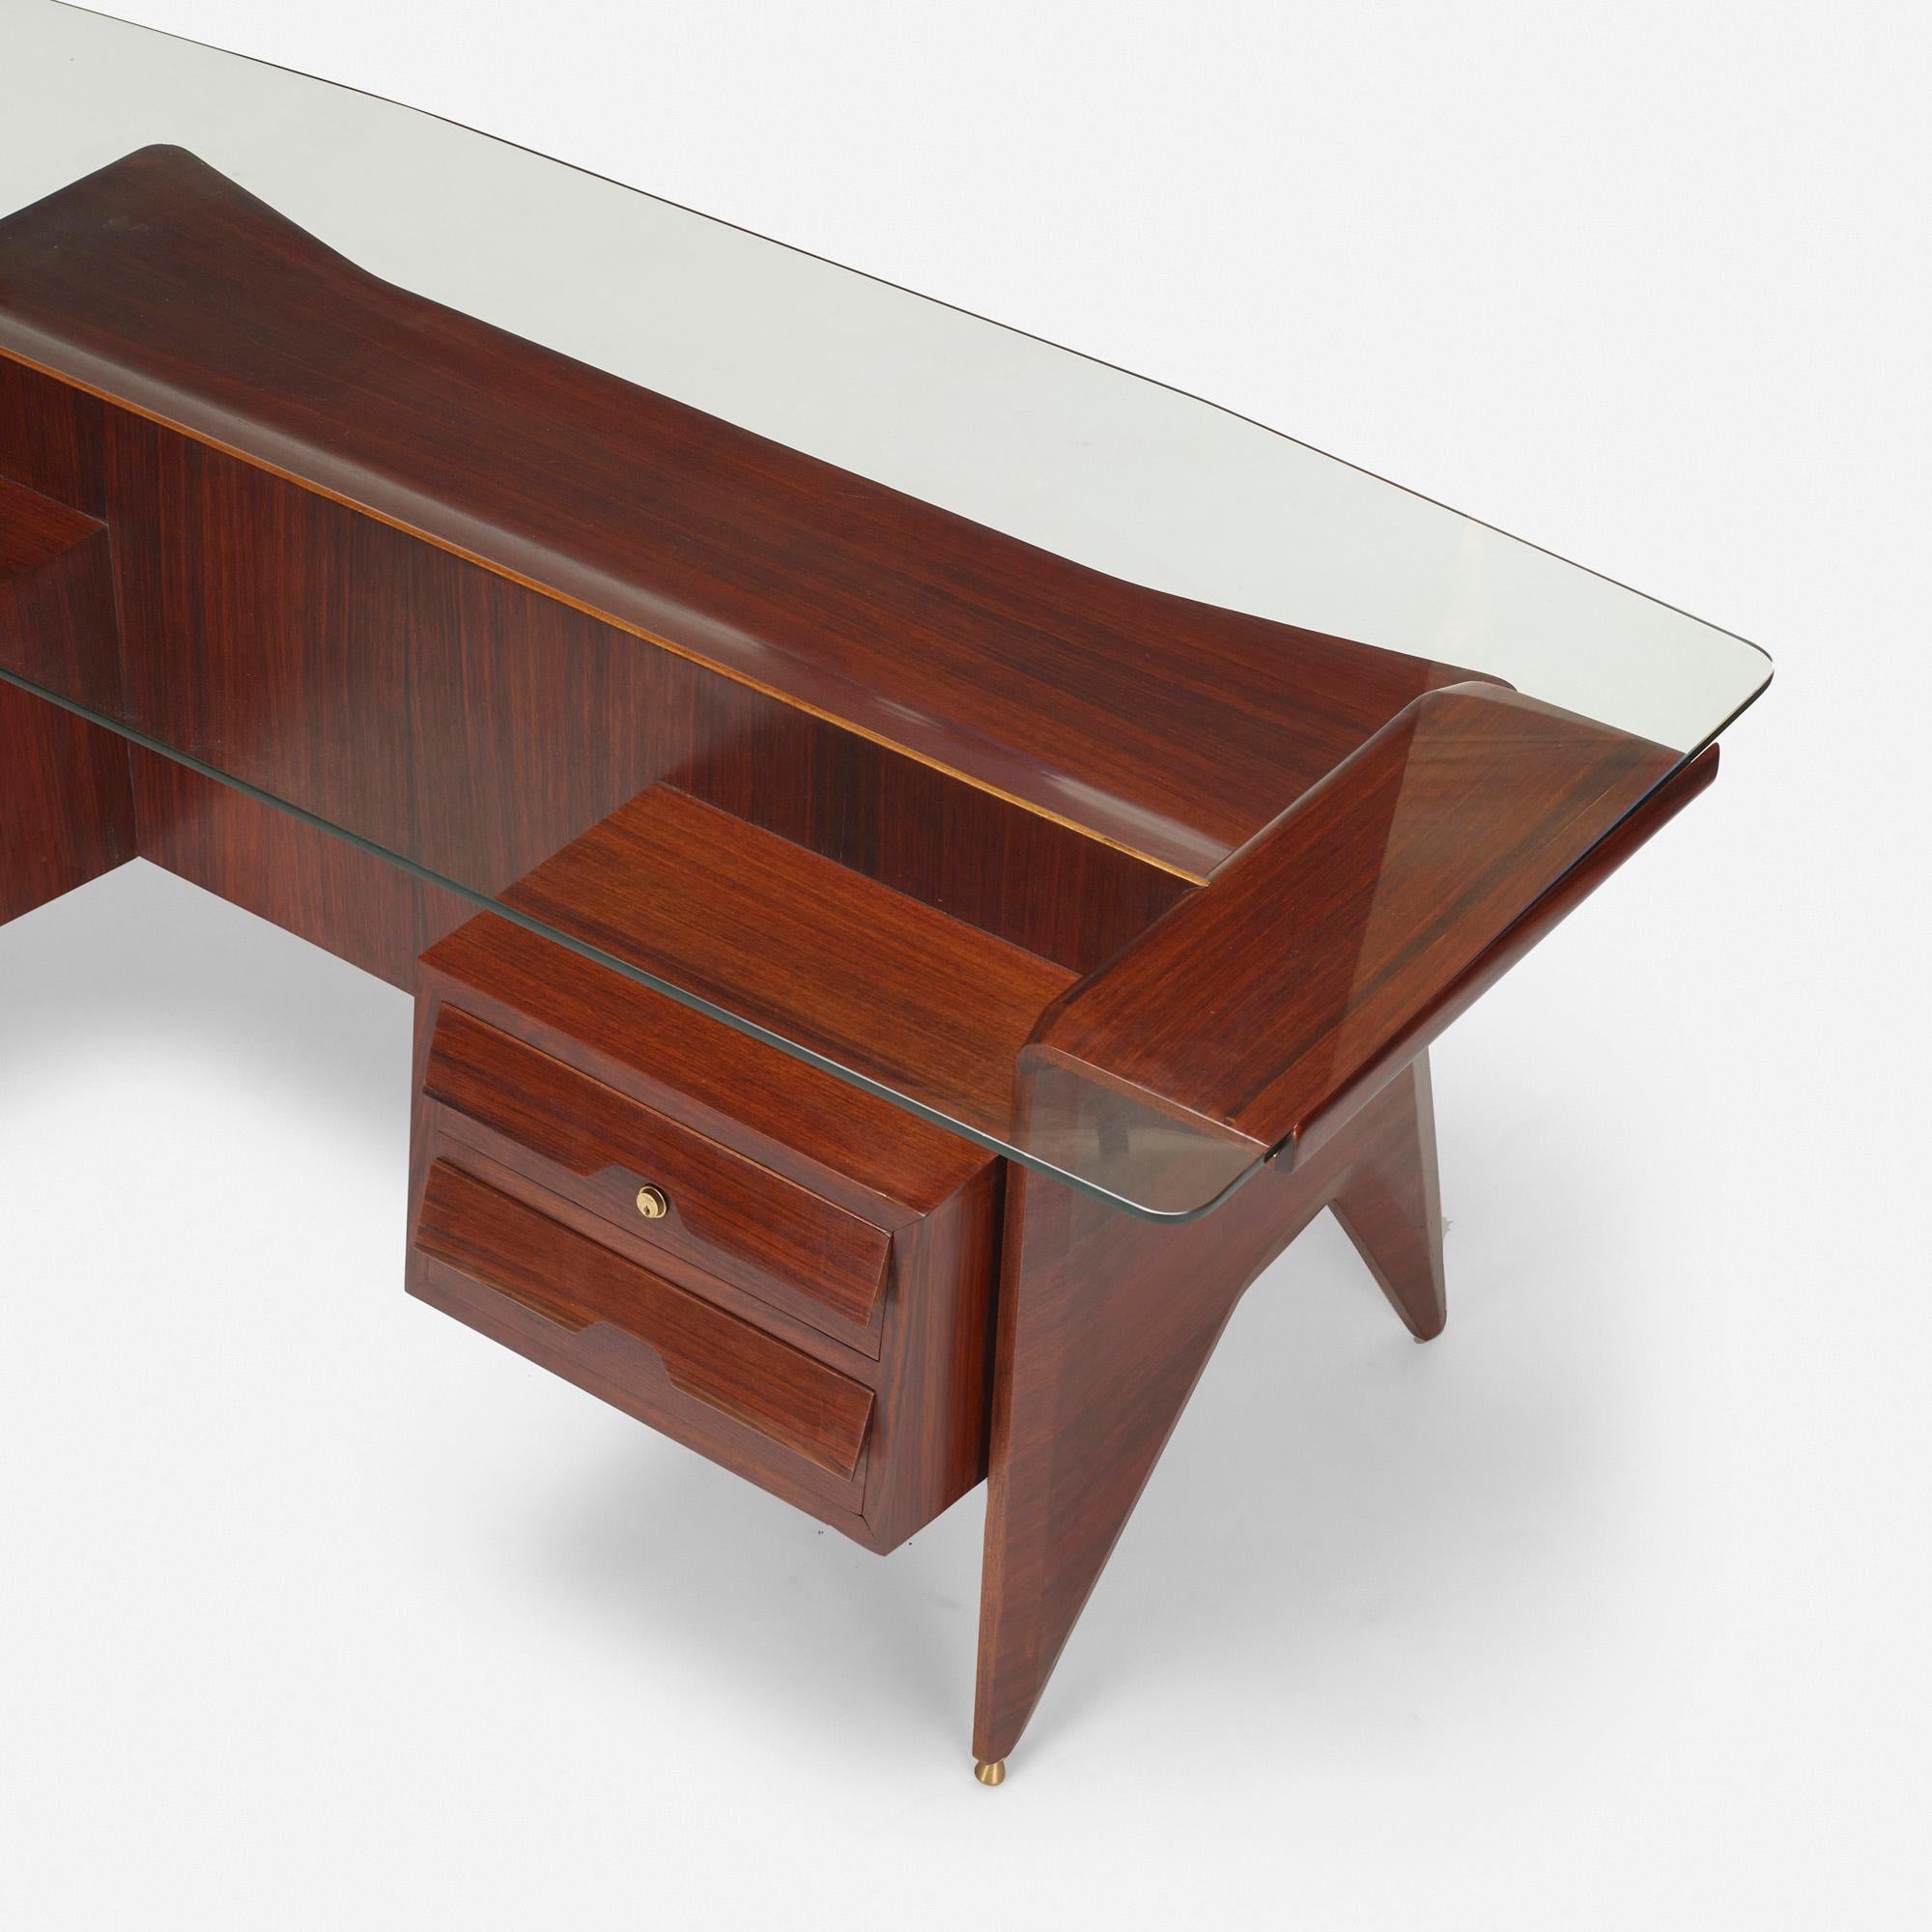 Important desk designed by Gio Ponti.
Produced by Dassi.
Measures: L 79” x W 34.5”x H 30.5”
Mahogany, glass and brass (brass sabots are adjustable)
1949,
Italy

Letters of authenticity
1. Laura Falconi (expert of Gio Ponti) wrote 26 page